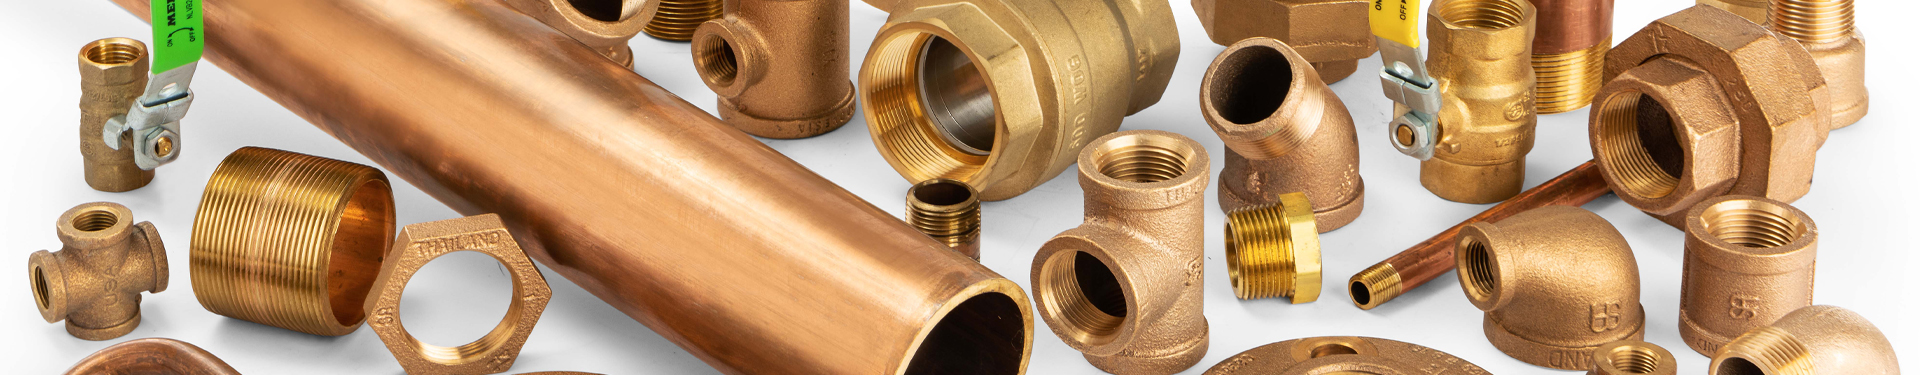 Advantages and Disadvantages of Brass Pipes